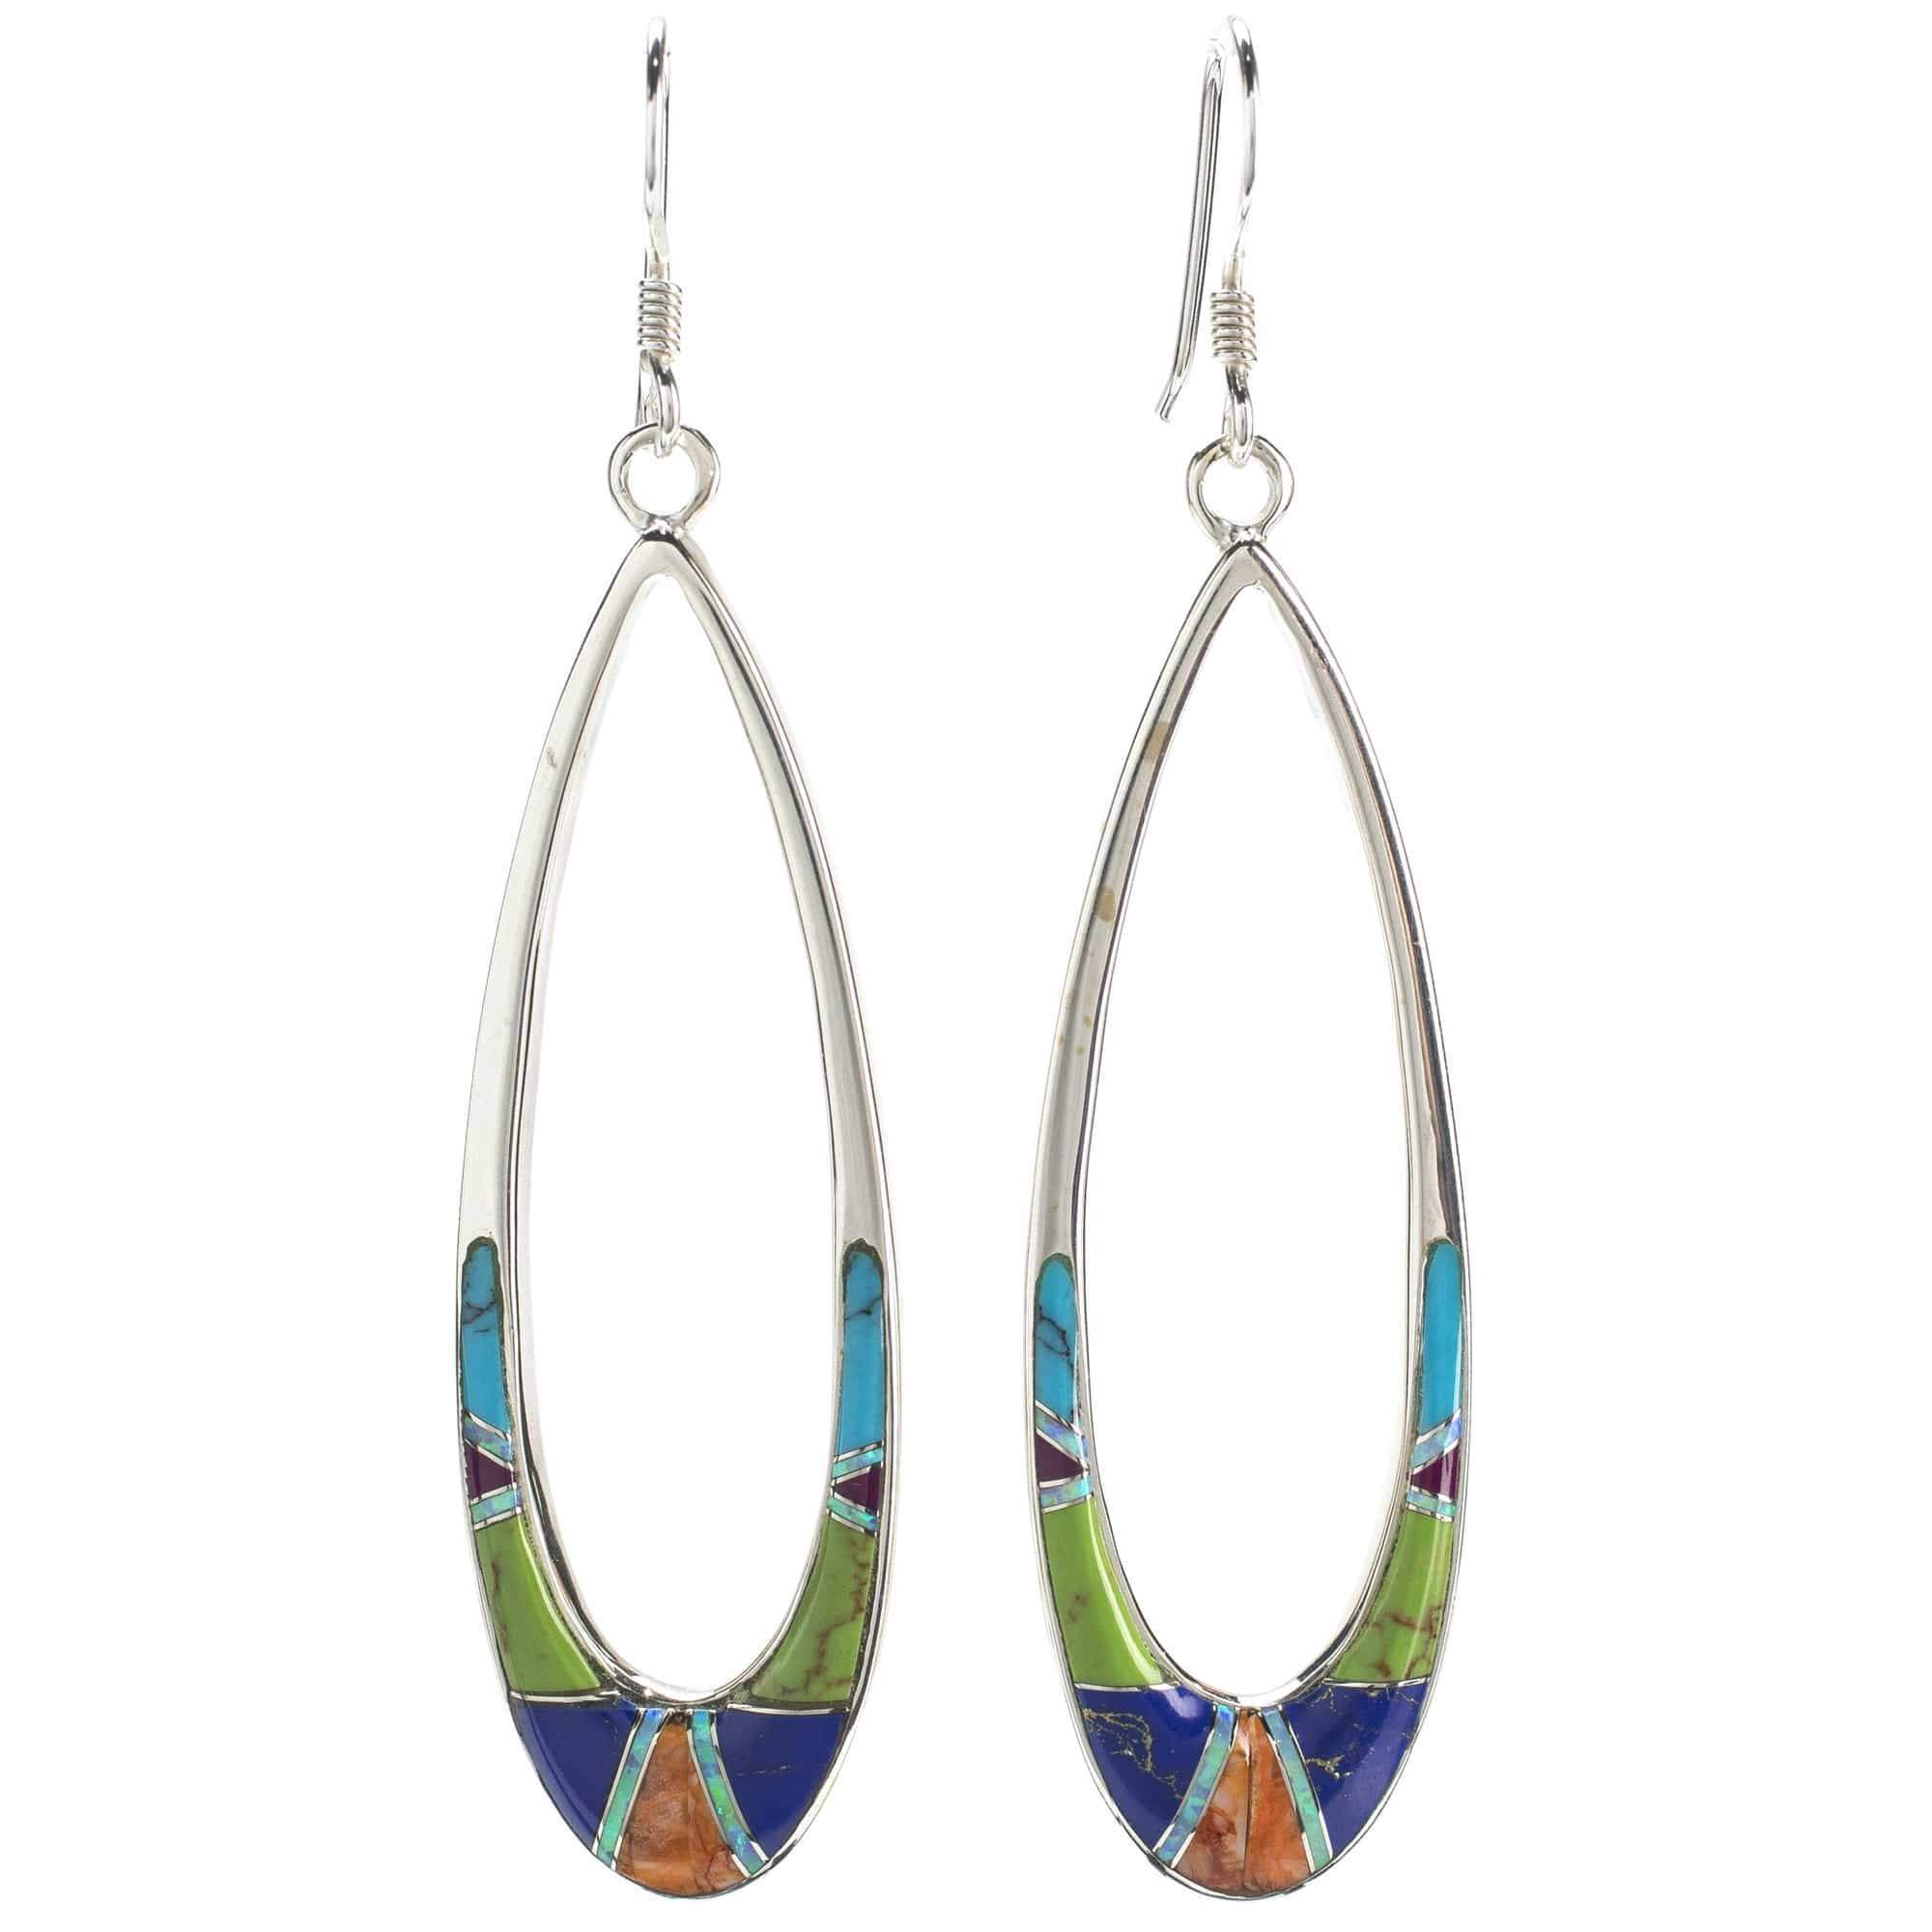 Kalifano Southwest Silver Jewelry Multi Gemstone Oval Hoop 925 Sterling Silver Earring with French Hook USA Handmade with Opal Accent NME.2300L.MT